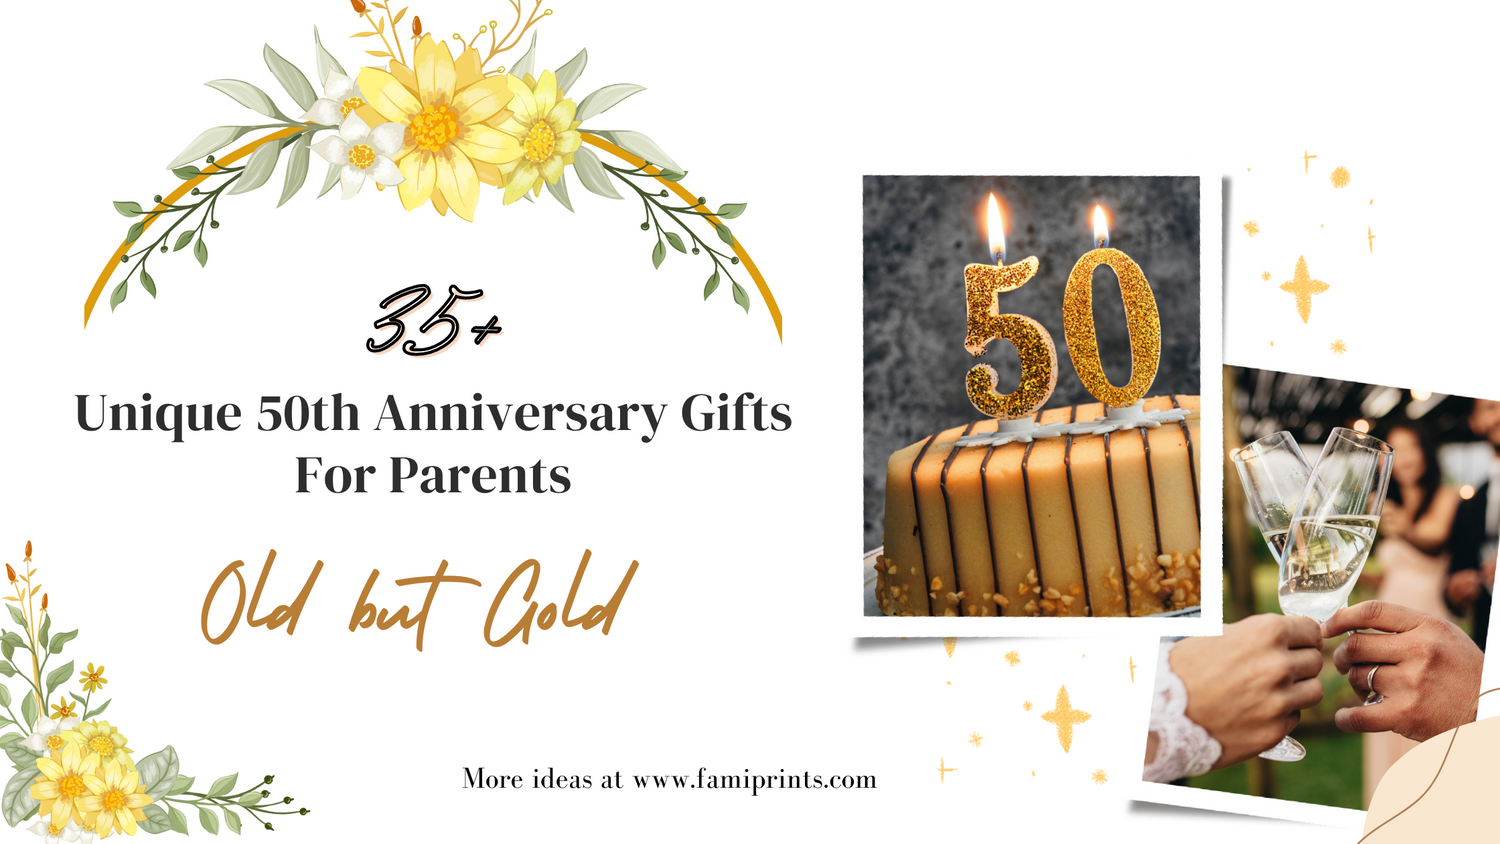 35+ Unique 50th Anniversary Gifts For Parents: Old But Gold - FamiPrints | Trending Customizable Family Gifts